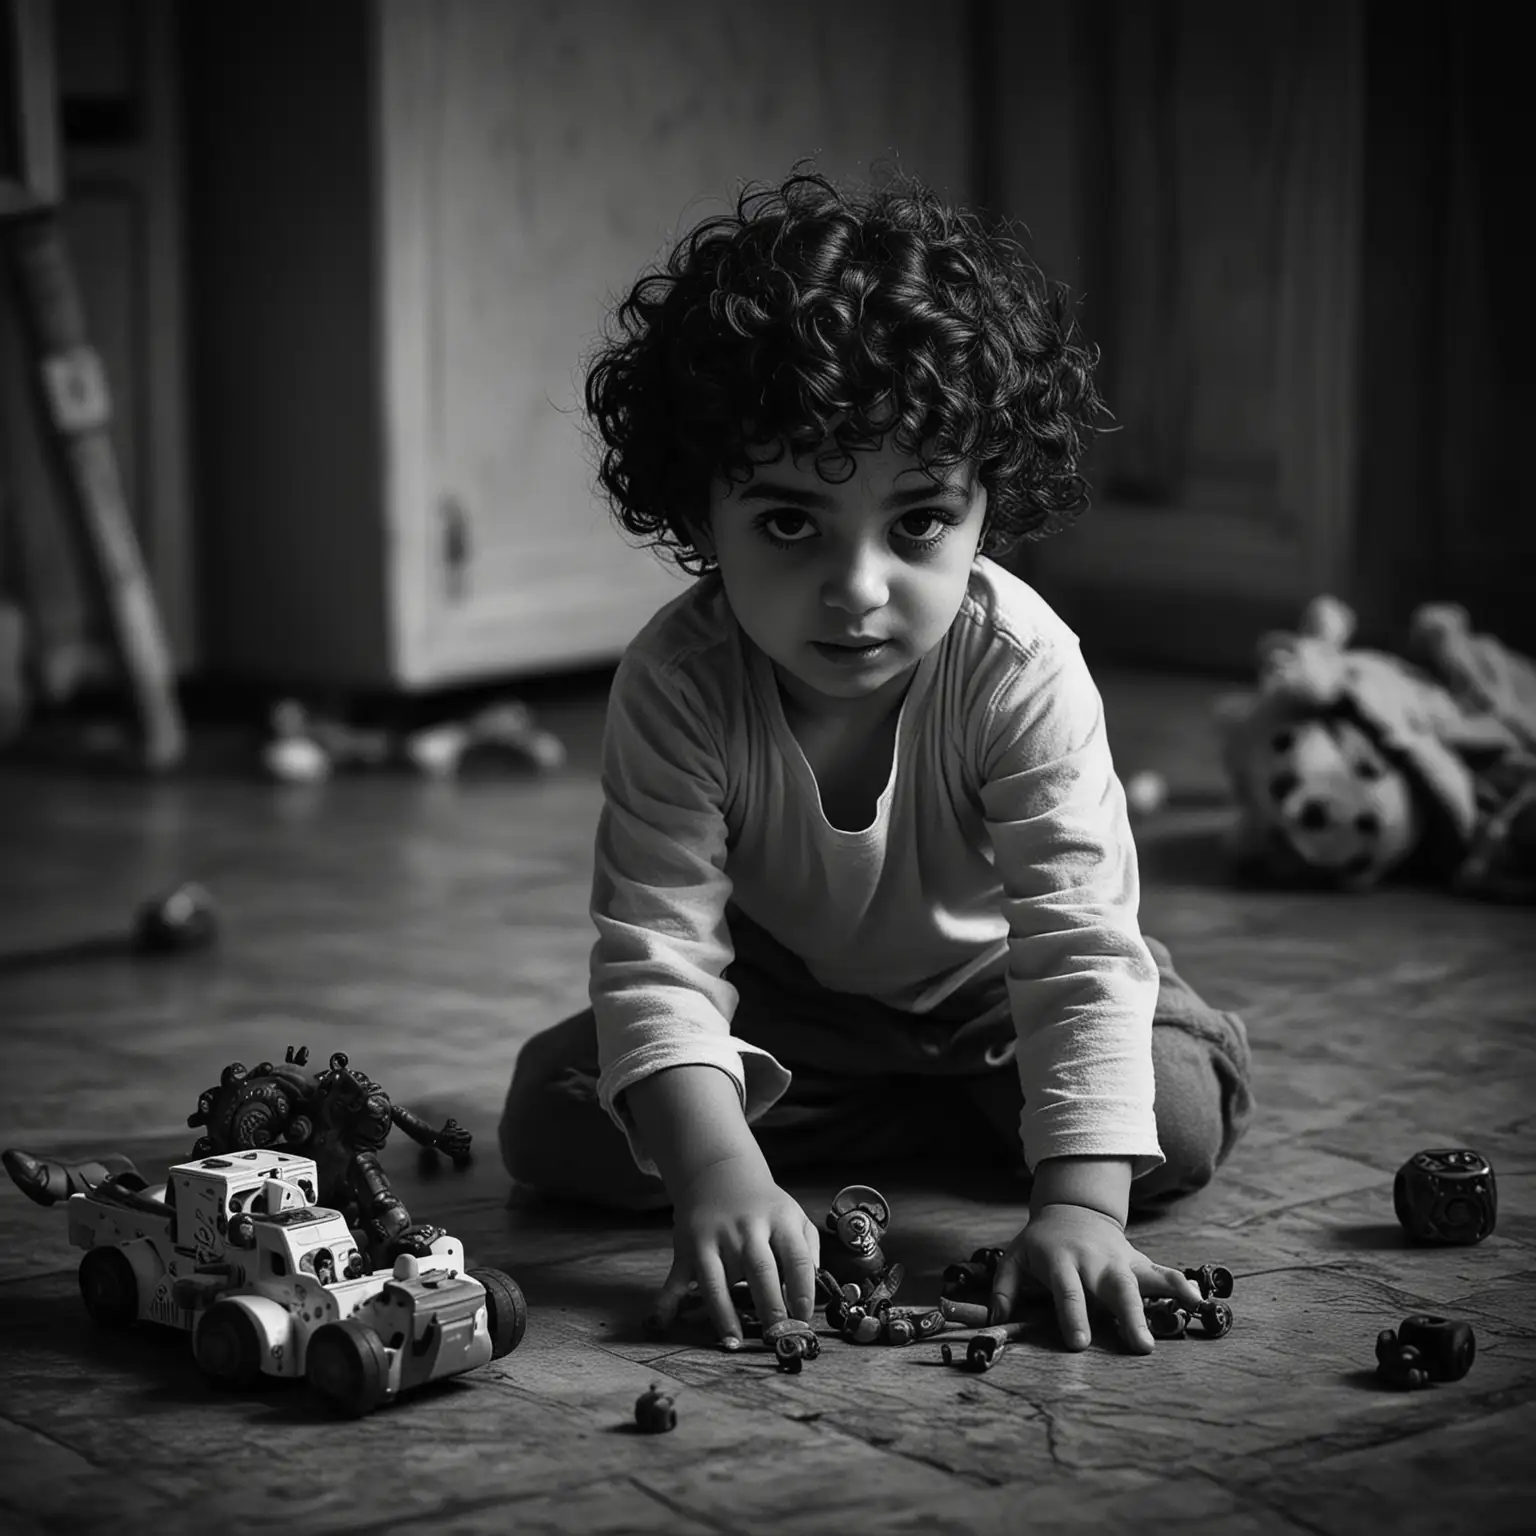 Middle Eastern Child Playing with Toys Curlyhaired Toddler in Dark Monochrome Ambiance